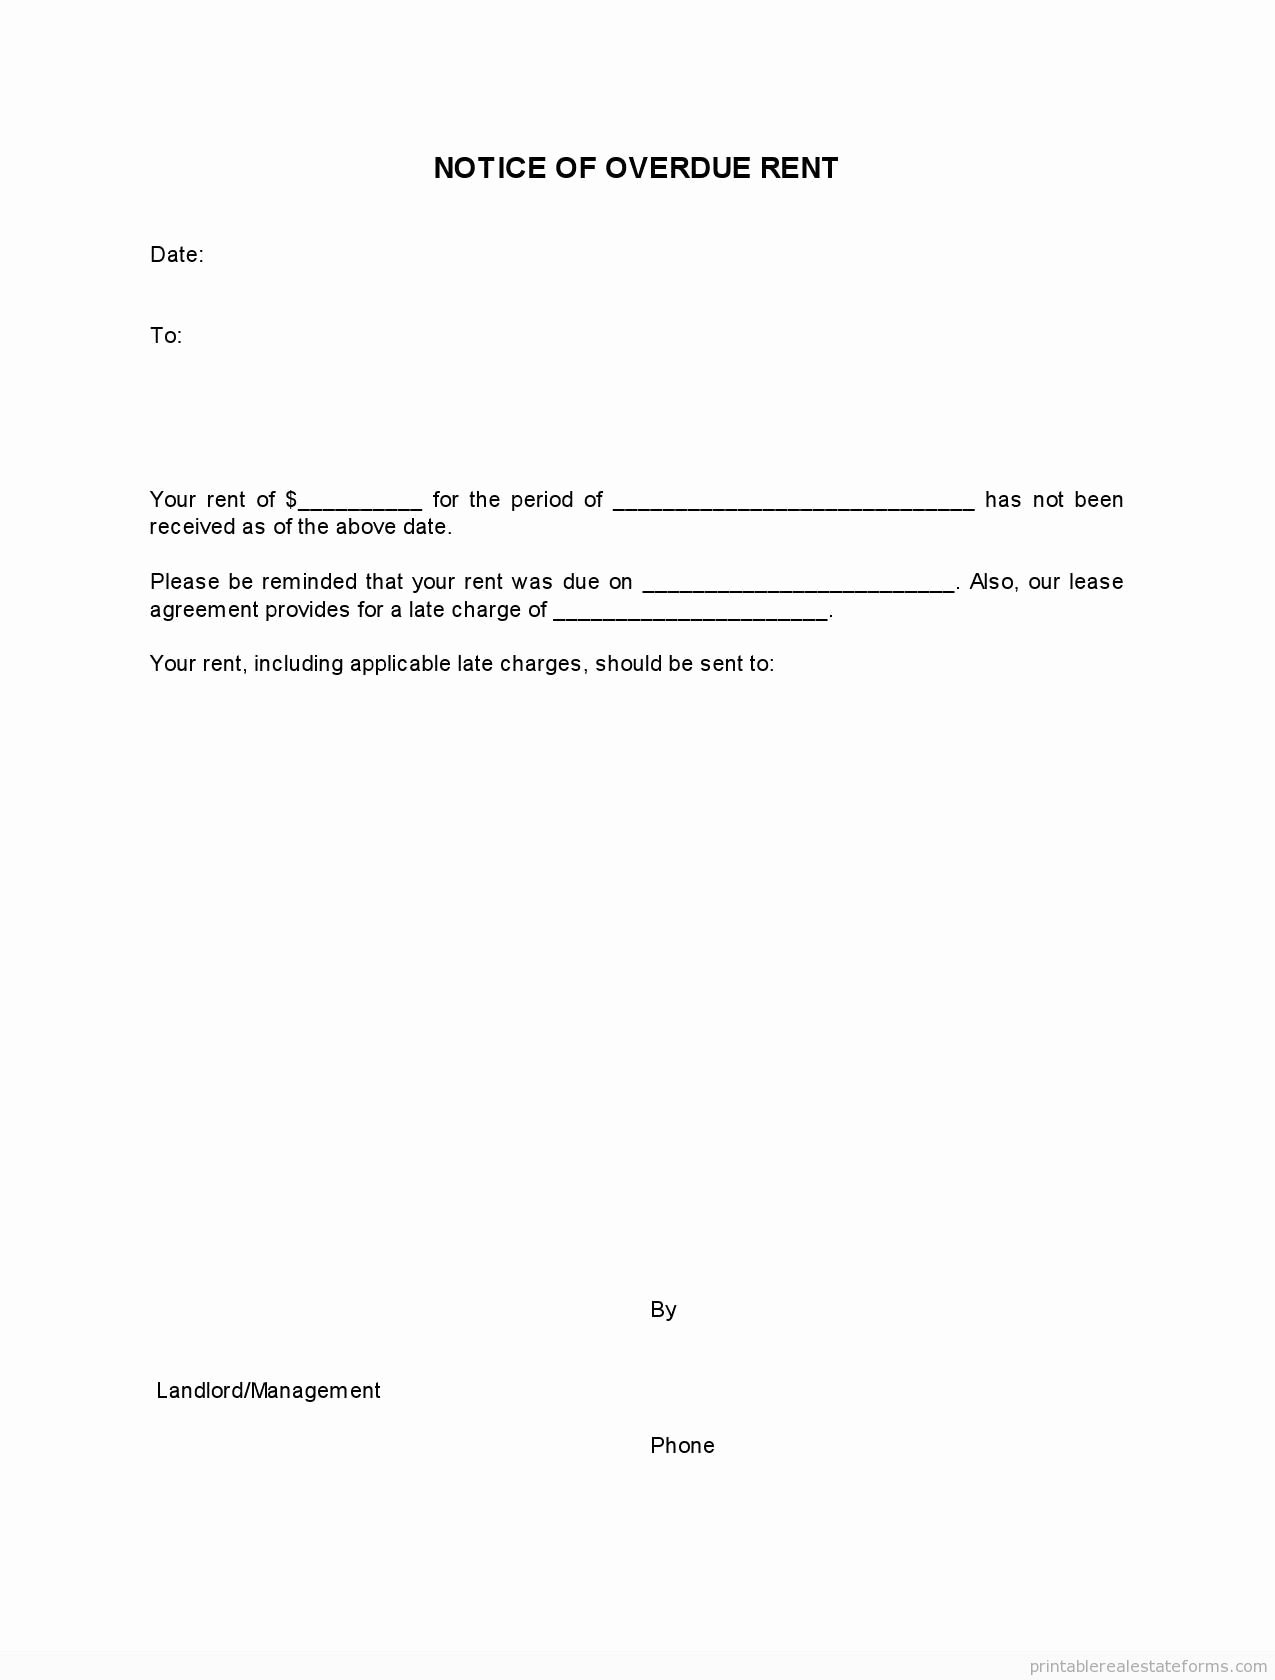 Late Rent Notice Pdf Awesome Sample Printable Notice Of Overdue Rent form Printable Real Estate forms 2014 In 2019